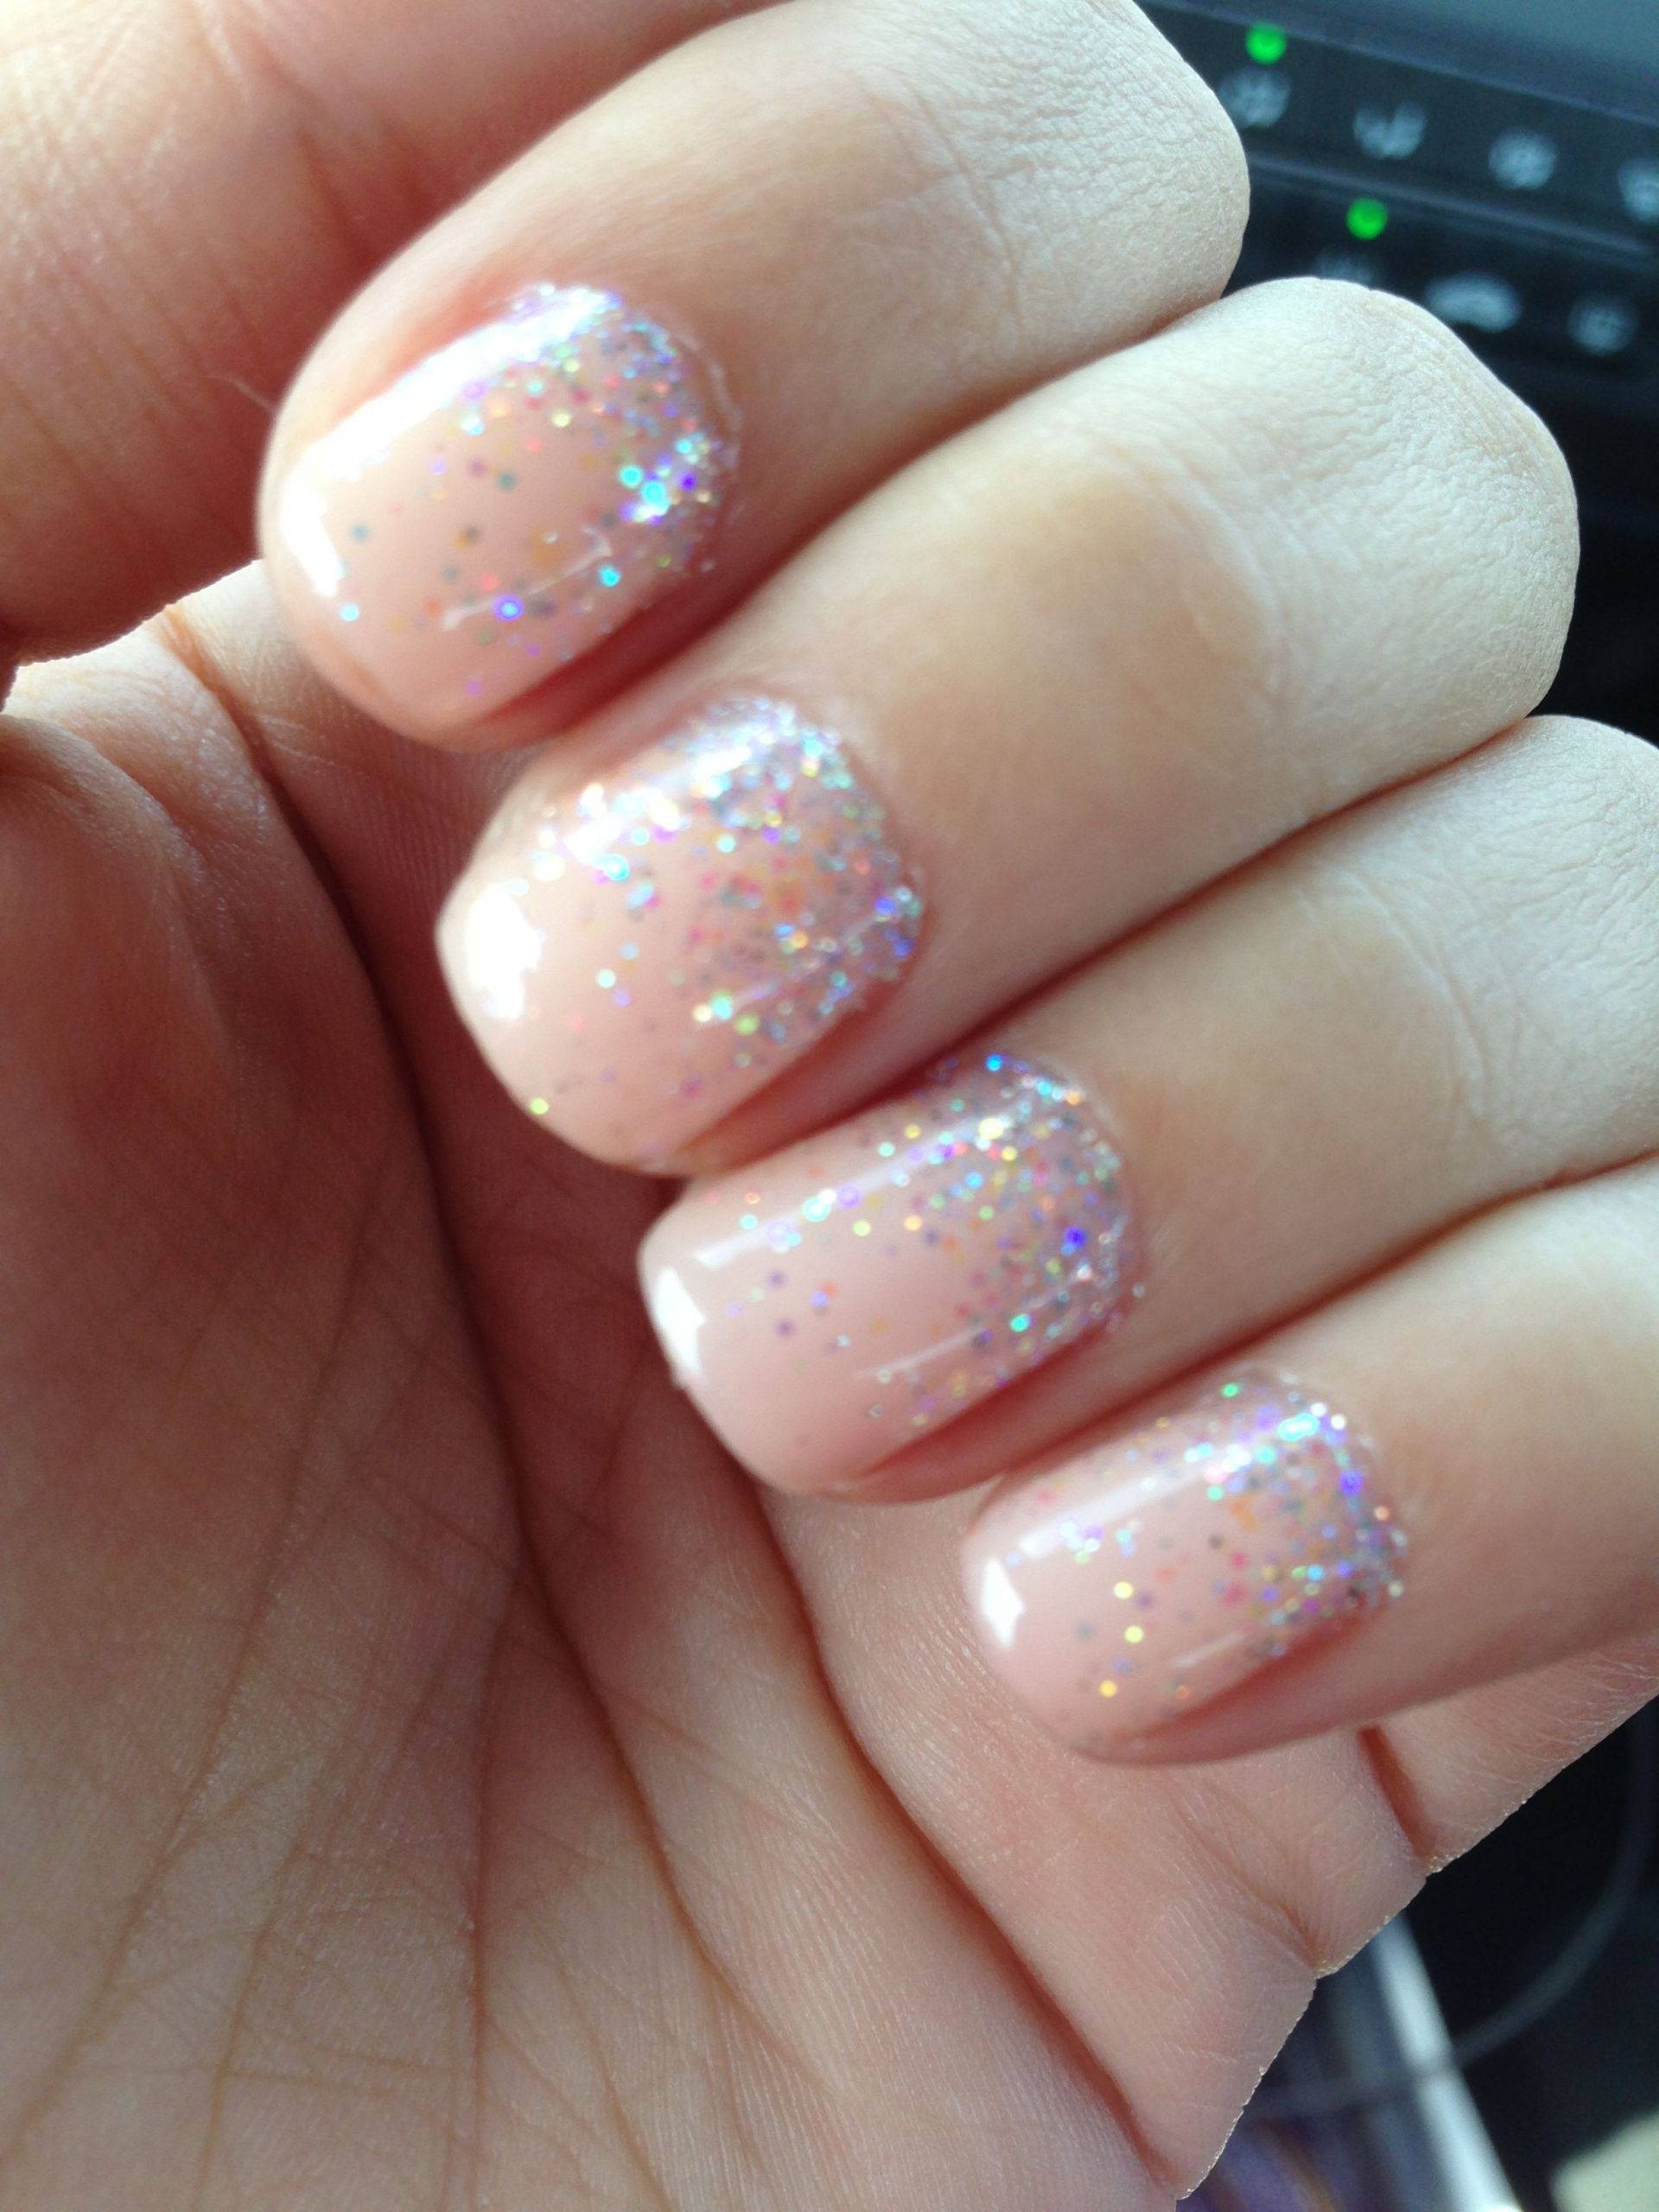 Gel Nails For Wedding
 My Wedding nails opi gel color passion sprinkled with